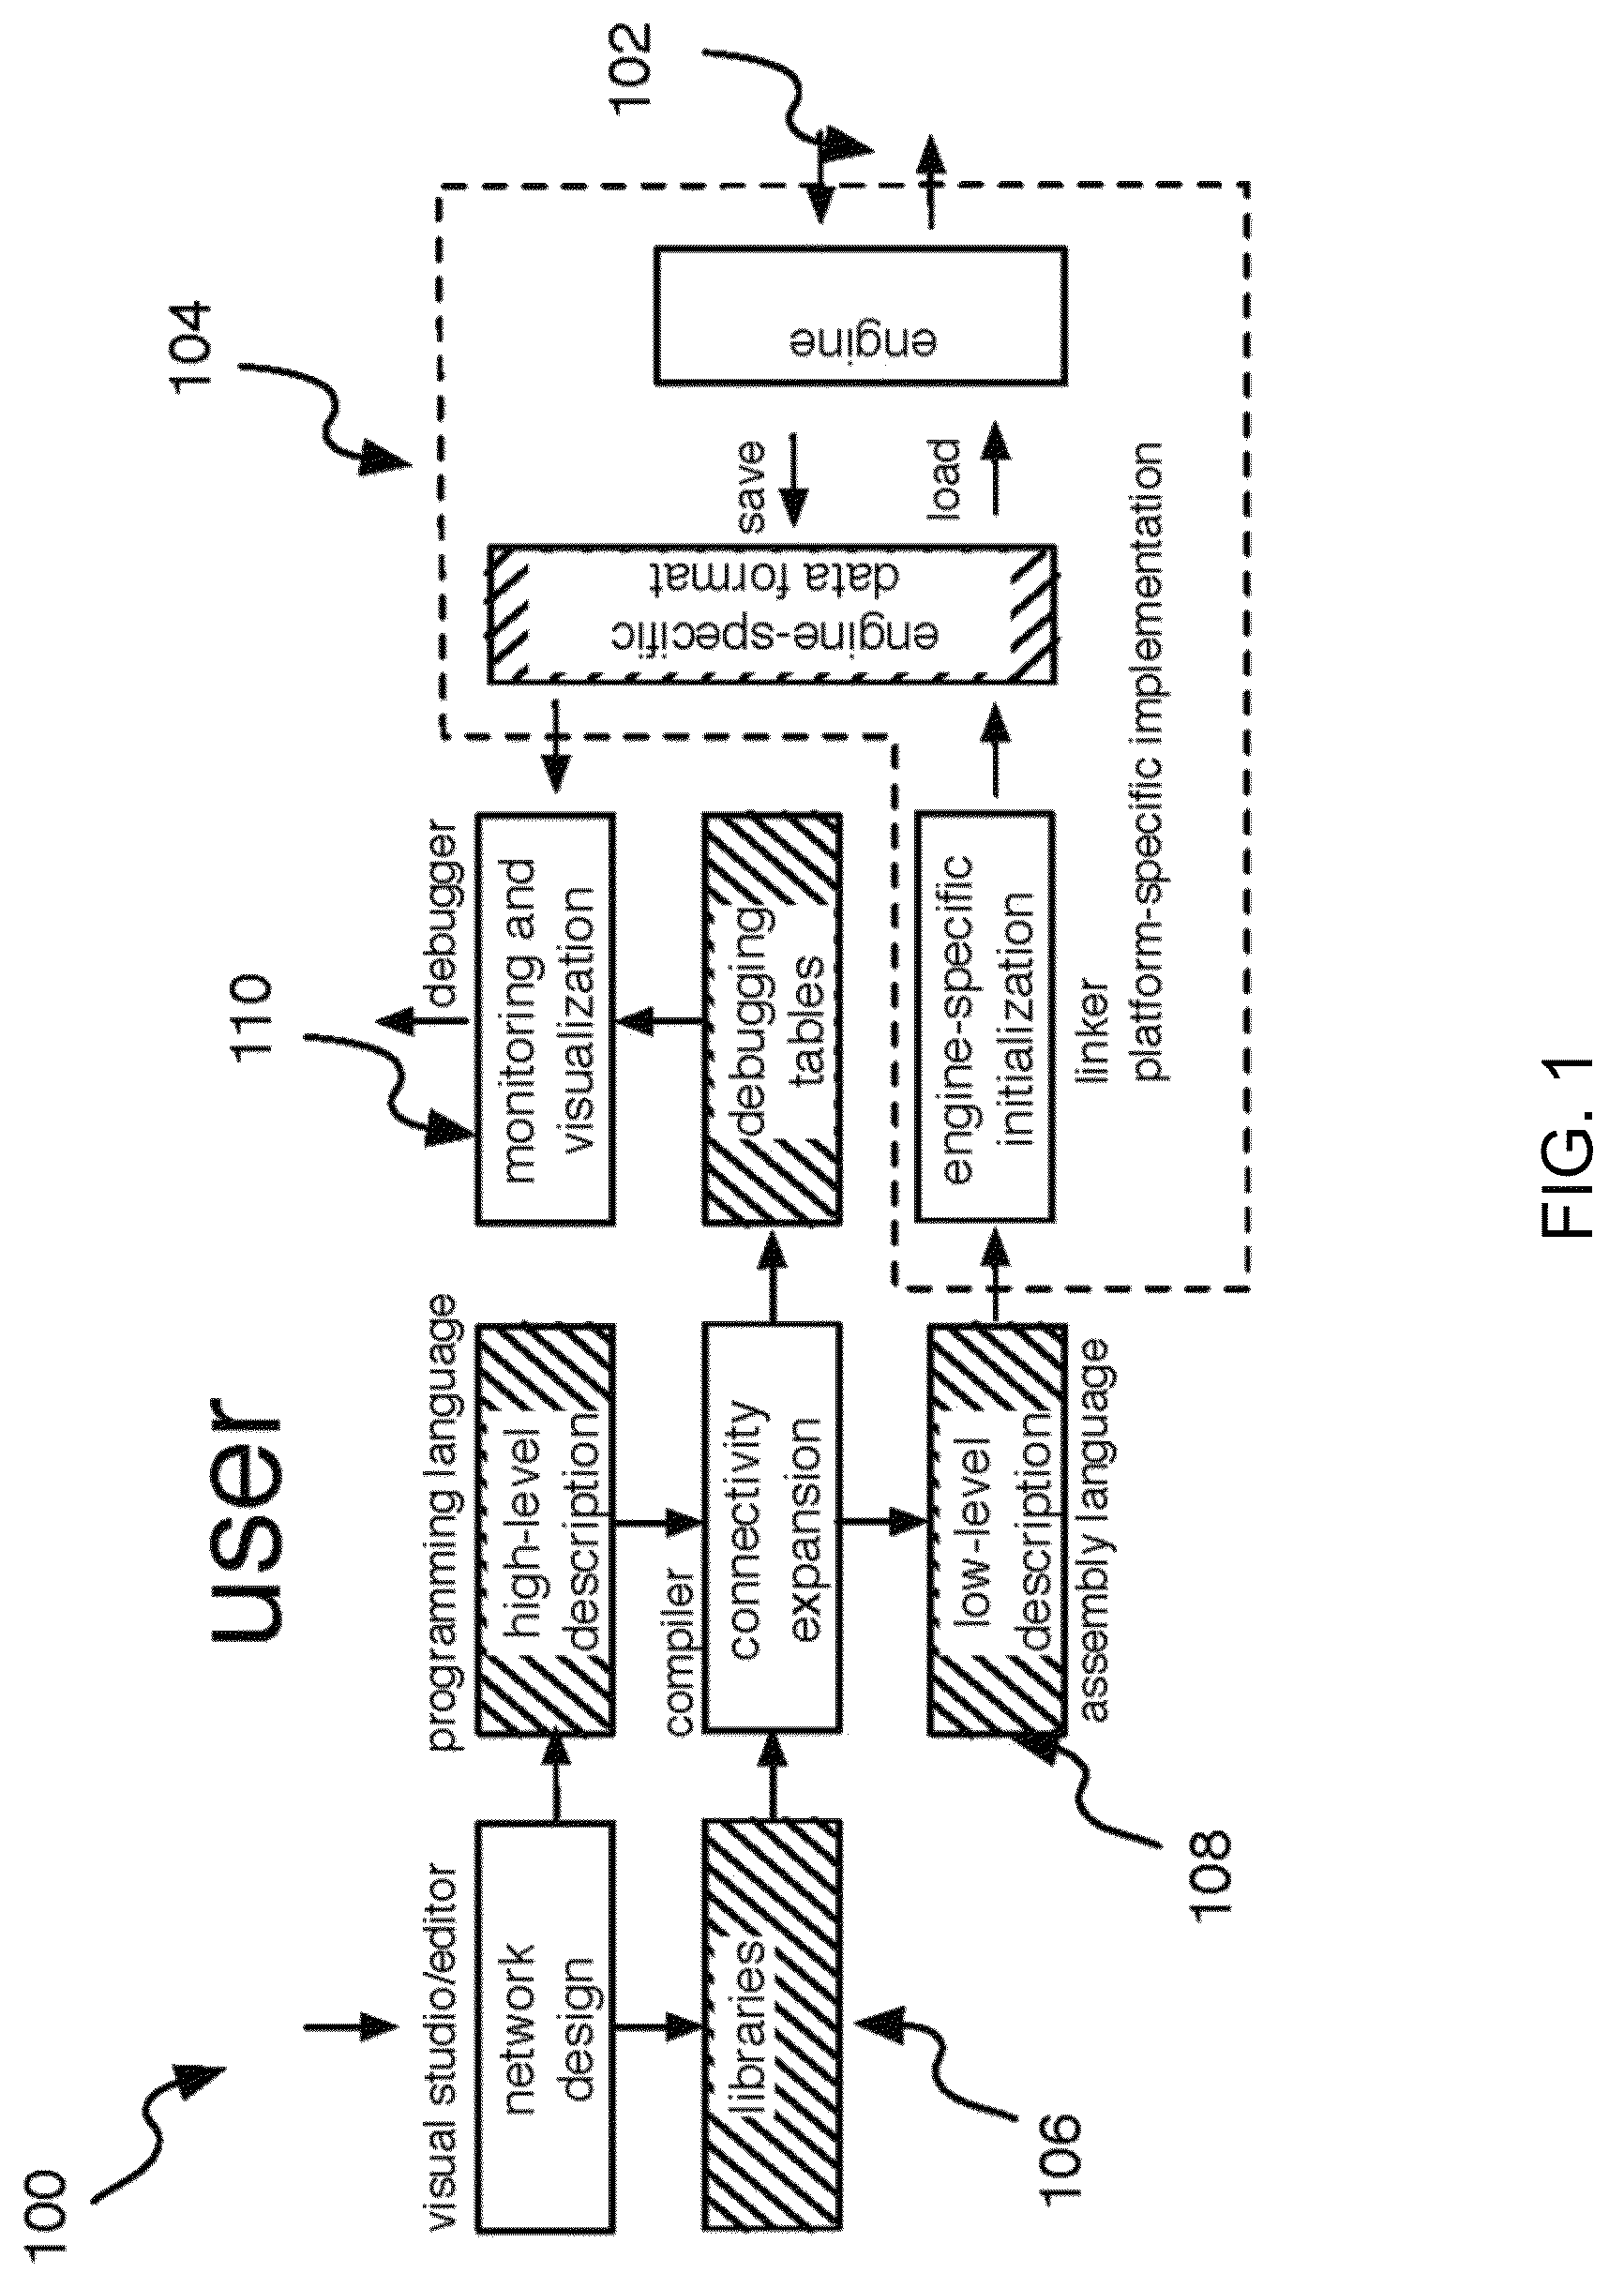 Systems and methods for providing a neural network having an elementary network description for efficient implementation of event-triggered plasticity rules